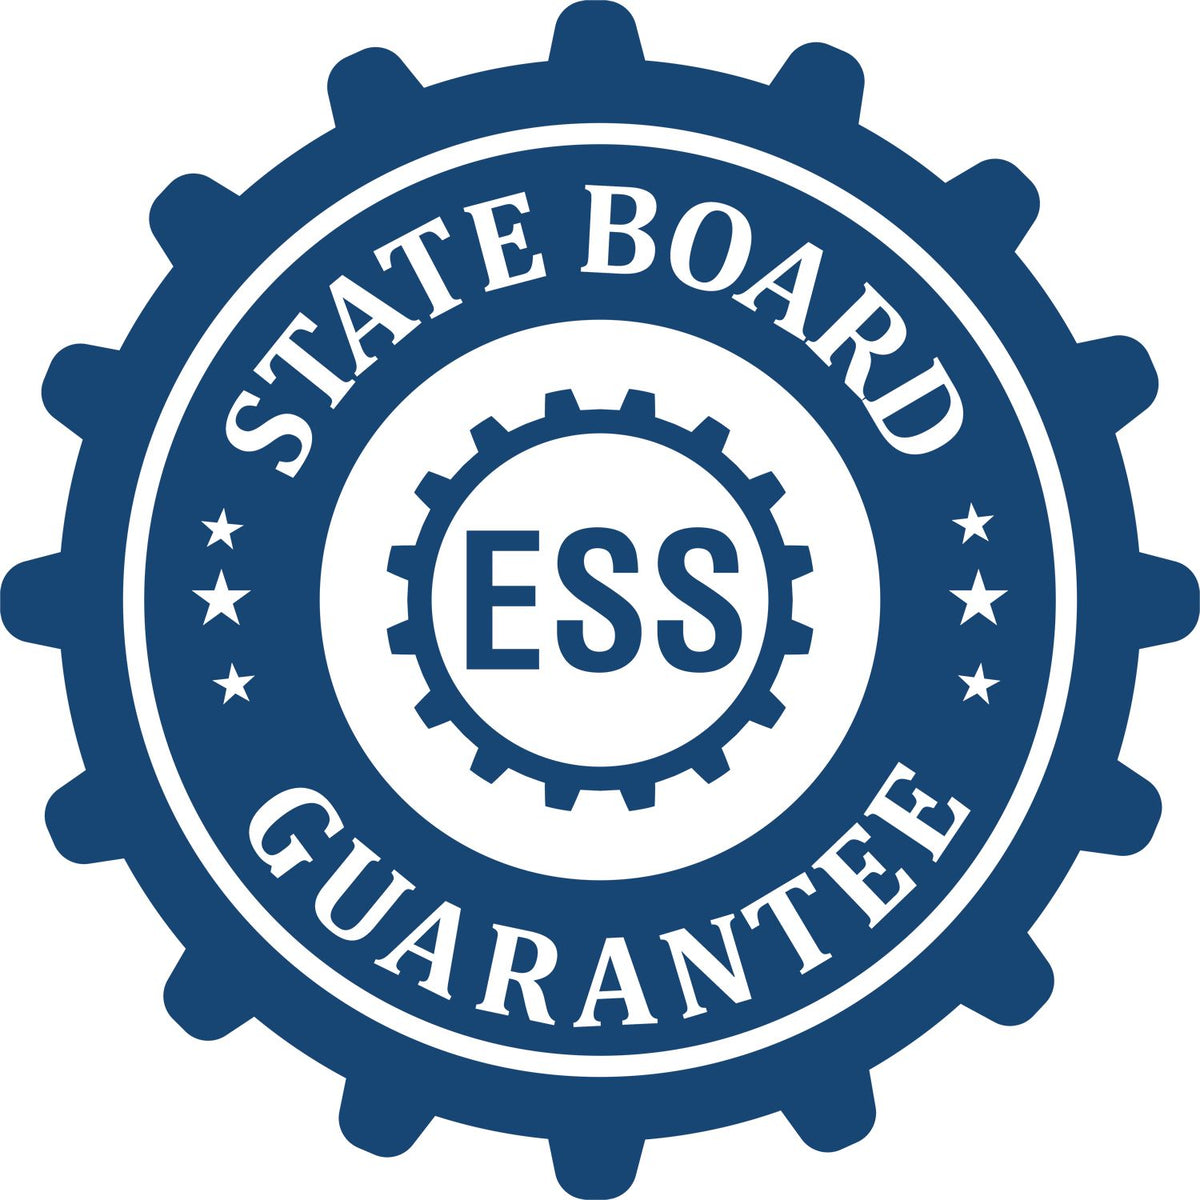 An emblem in a gear shape illustrating a state board guarantee for the Heavy-Duty Wyoming Rectangular Notary Stamp product.